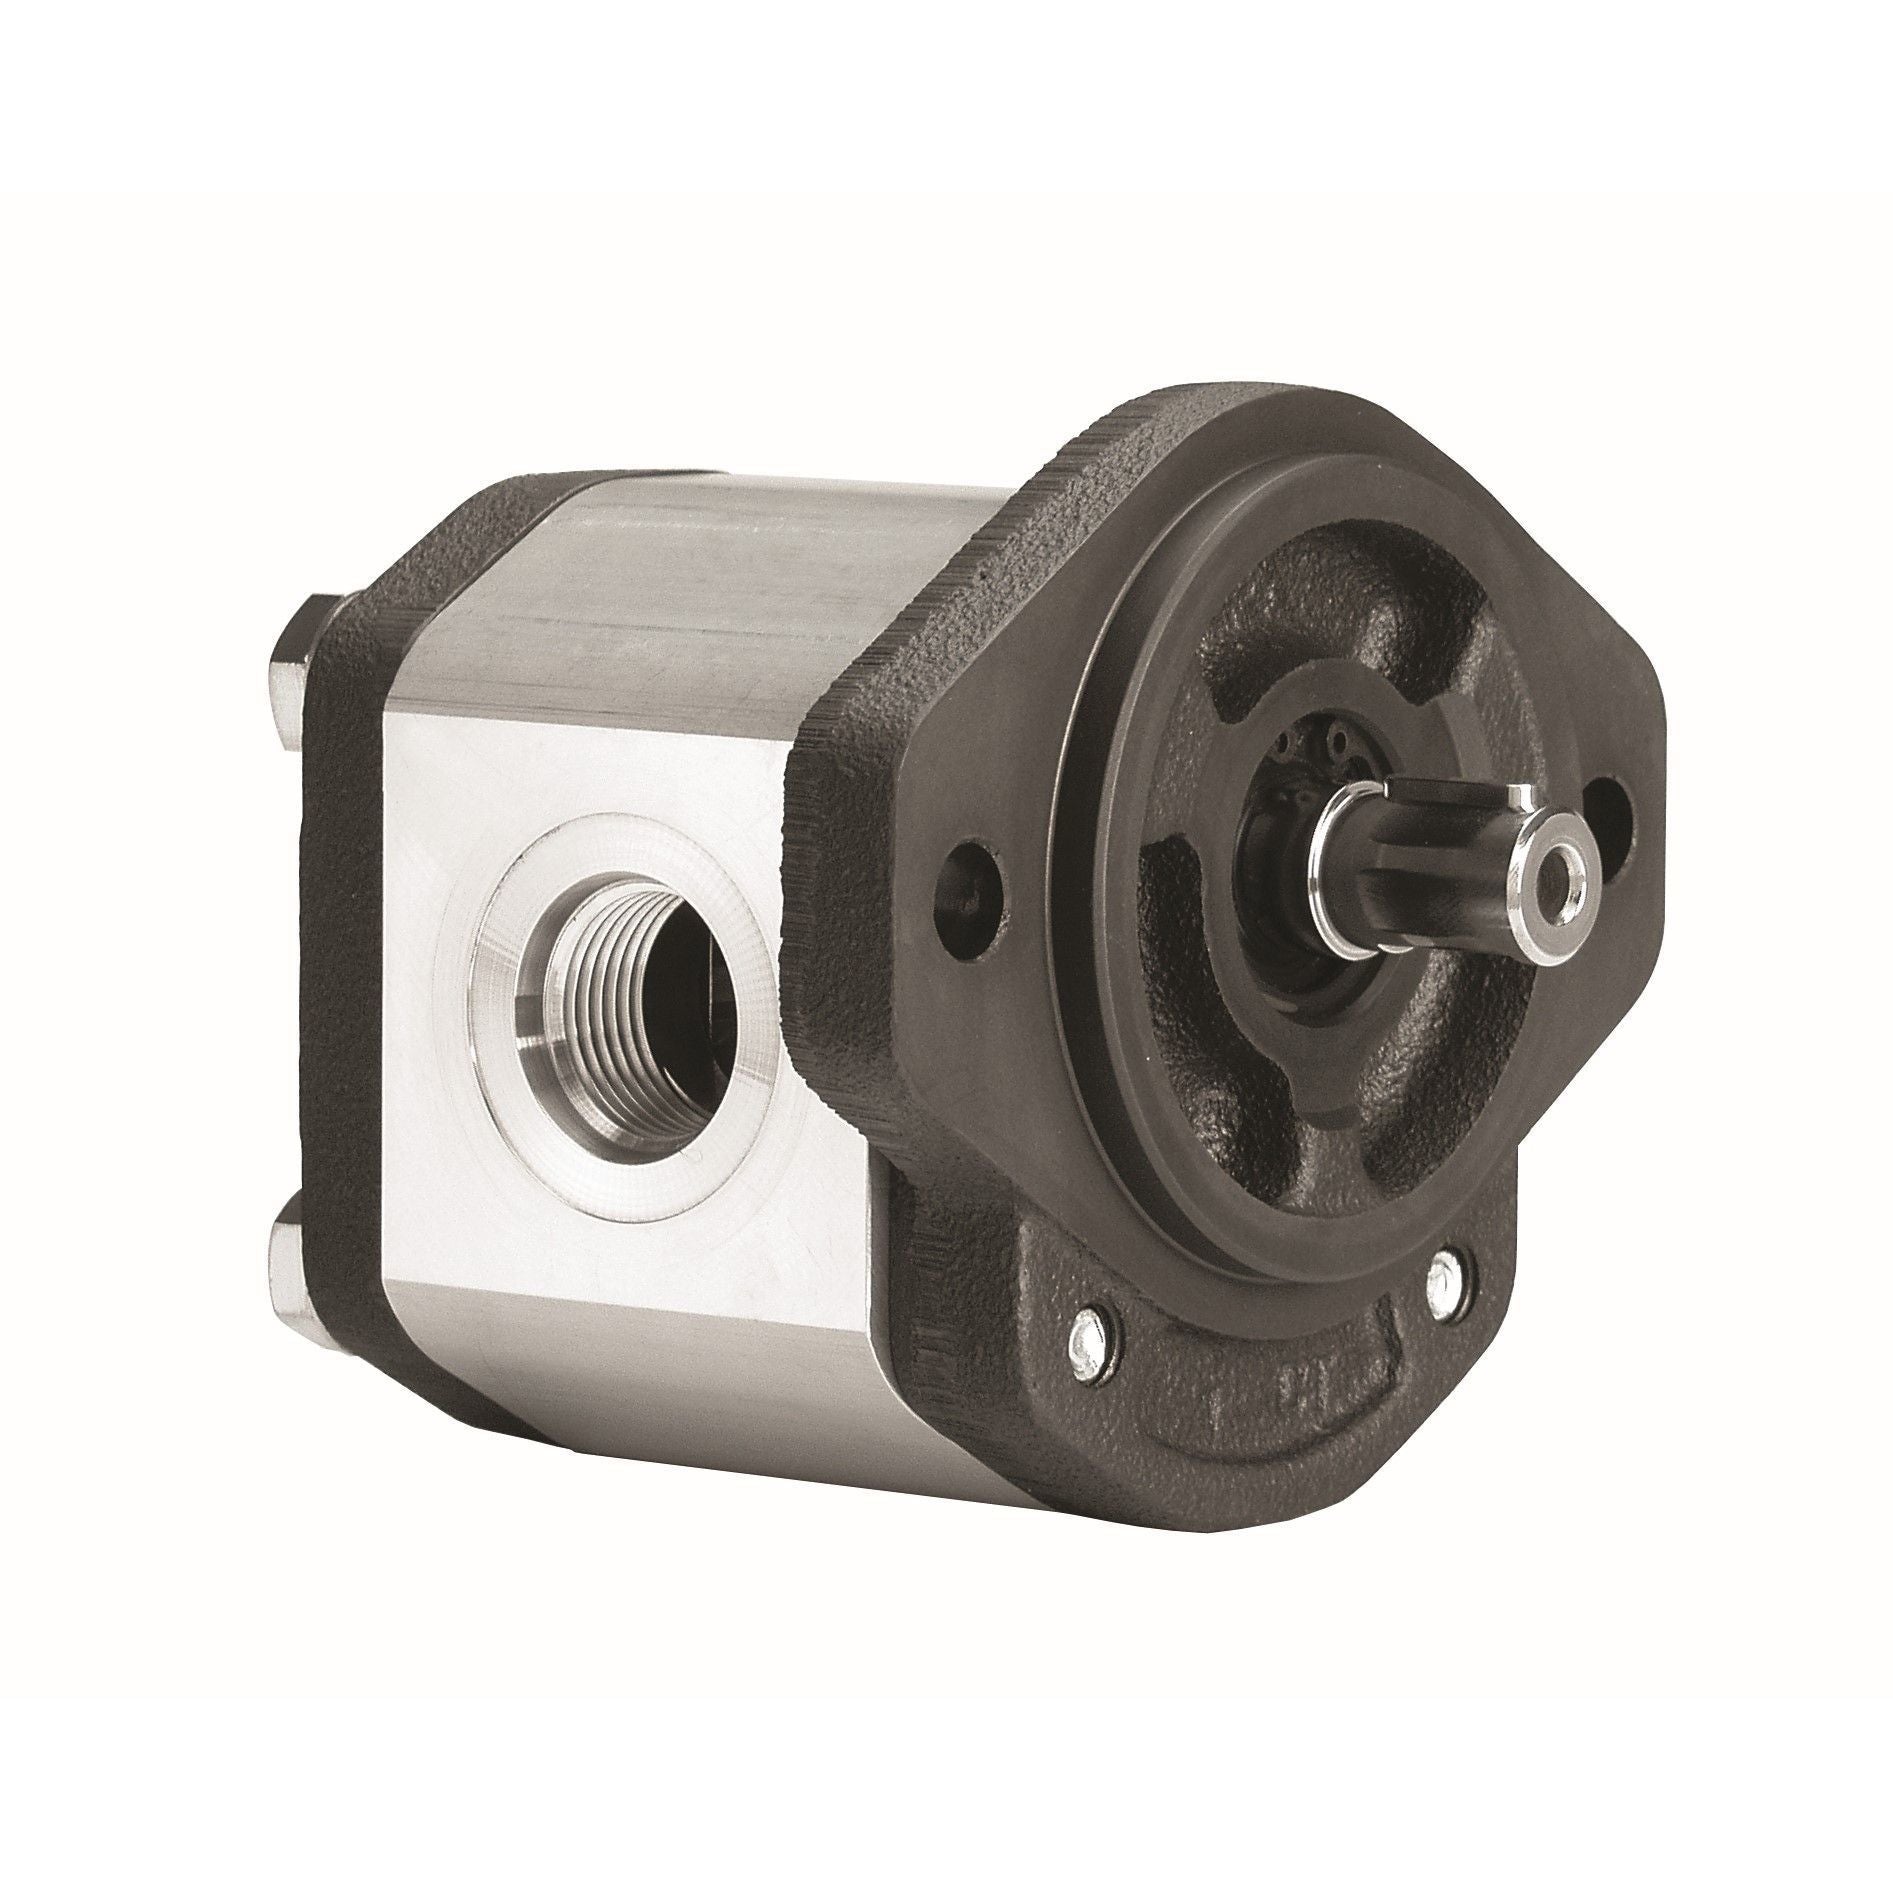 GHP1A-D-3 : Marzocchi Gear Pump, CW, 2.1cc (0.1281in3), 1 GPM, 3915psi, 6000 RPM, #8 SAE (1/2") In, #6 SAE (3/8") Out, Keyed Shaft 1/2" Bore x 1/8" Key, SAE AA 2-Bolt Mount